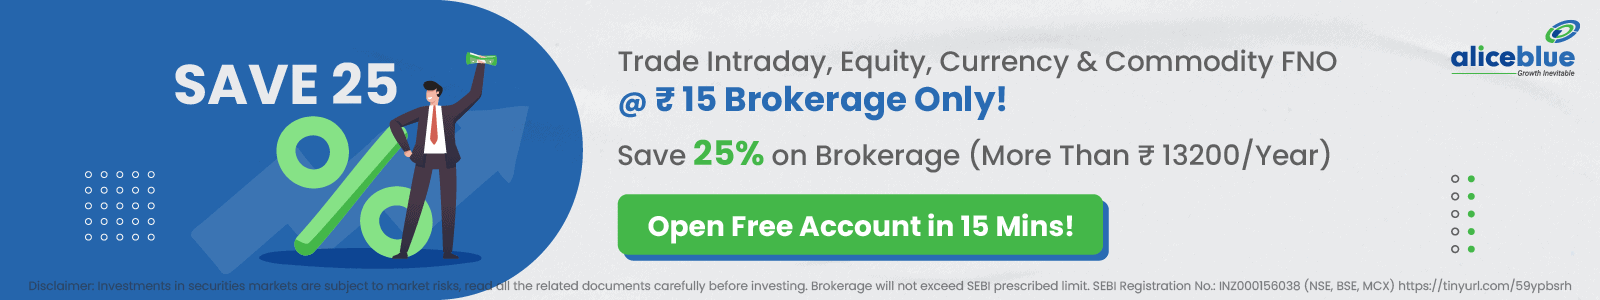 Invest in Trade Intraday, Equity, Currency at Rs.15 Brokerage only in Alice Blue